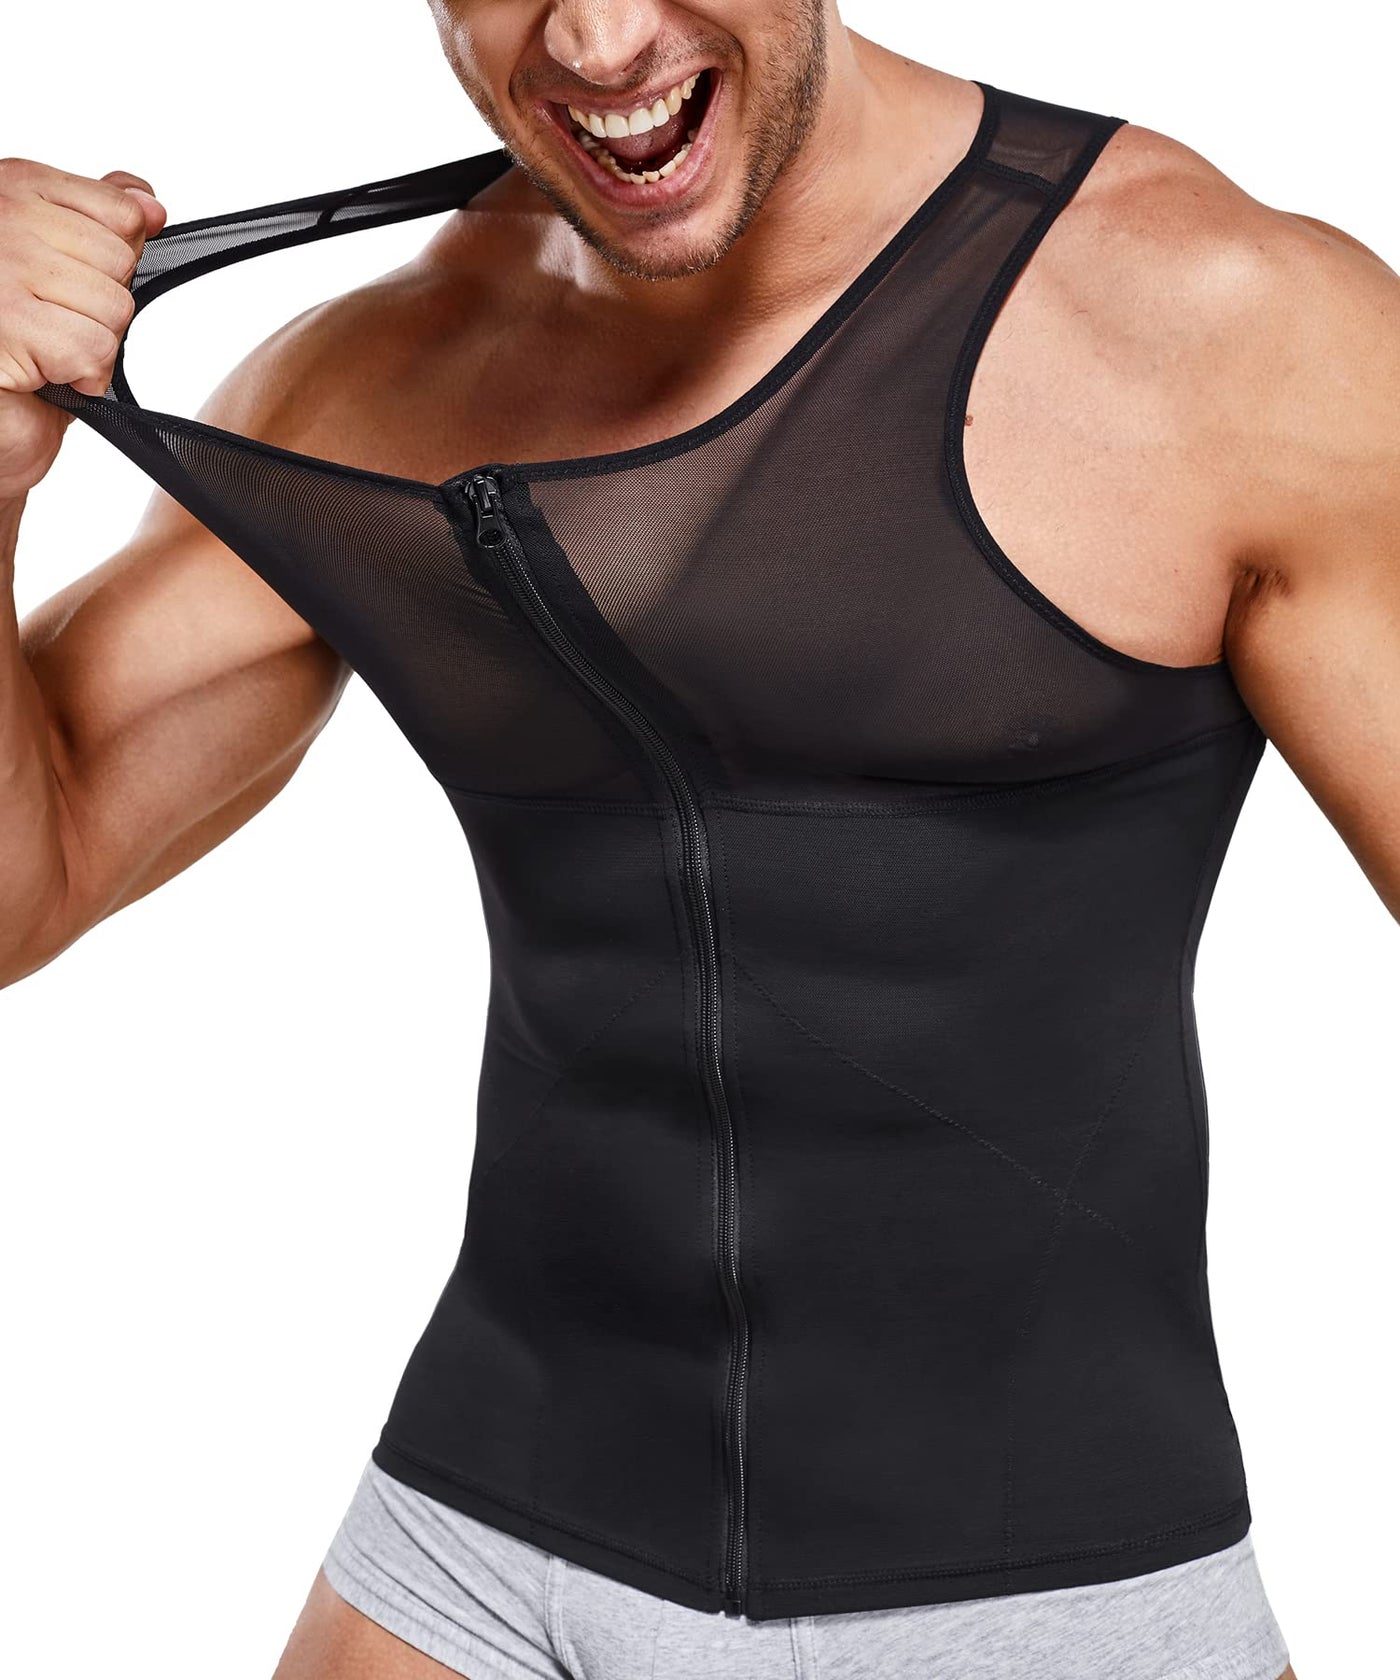 SOLCYSX Mens Compression Shirt Belly Slimming Body Shaper Vest